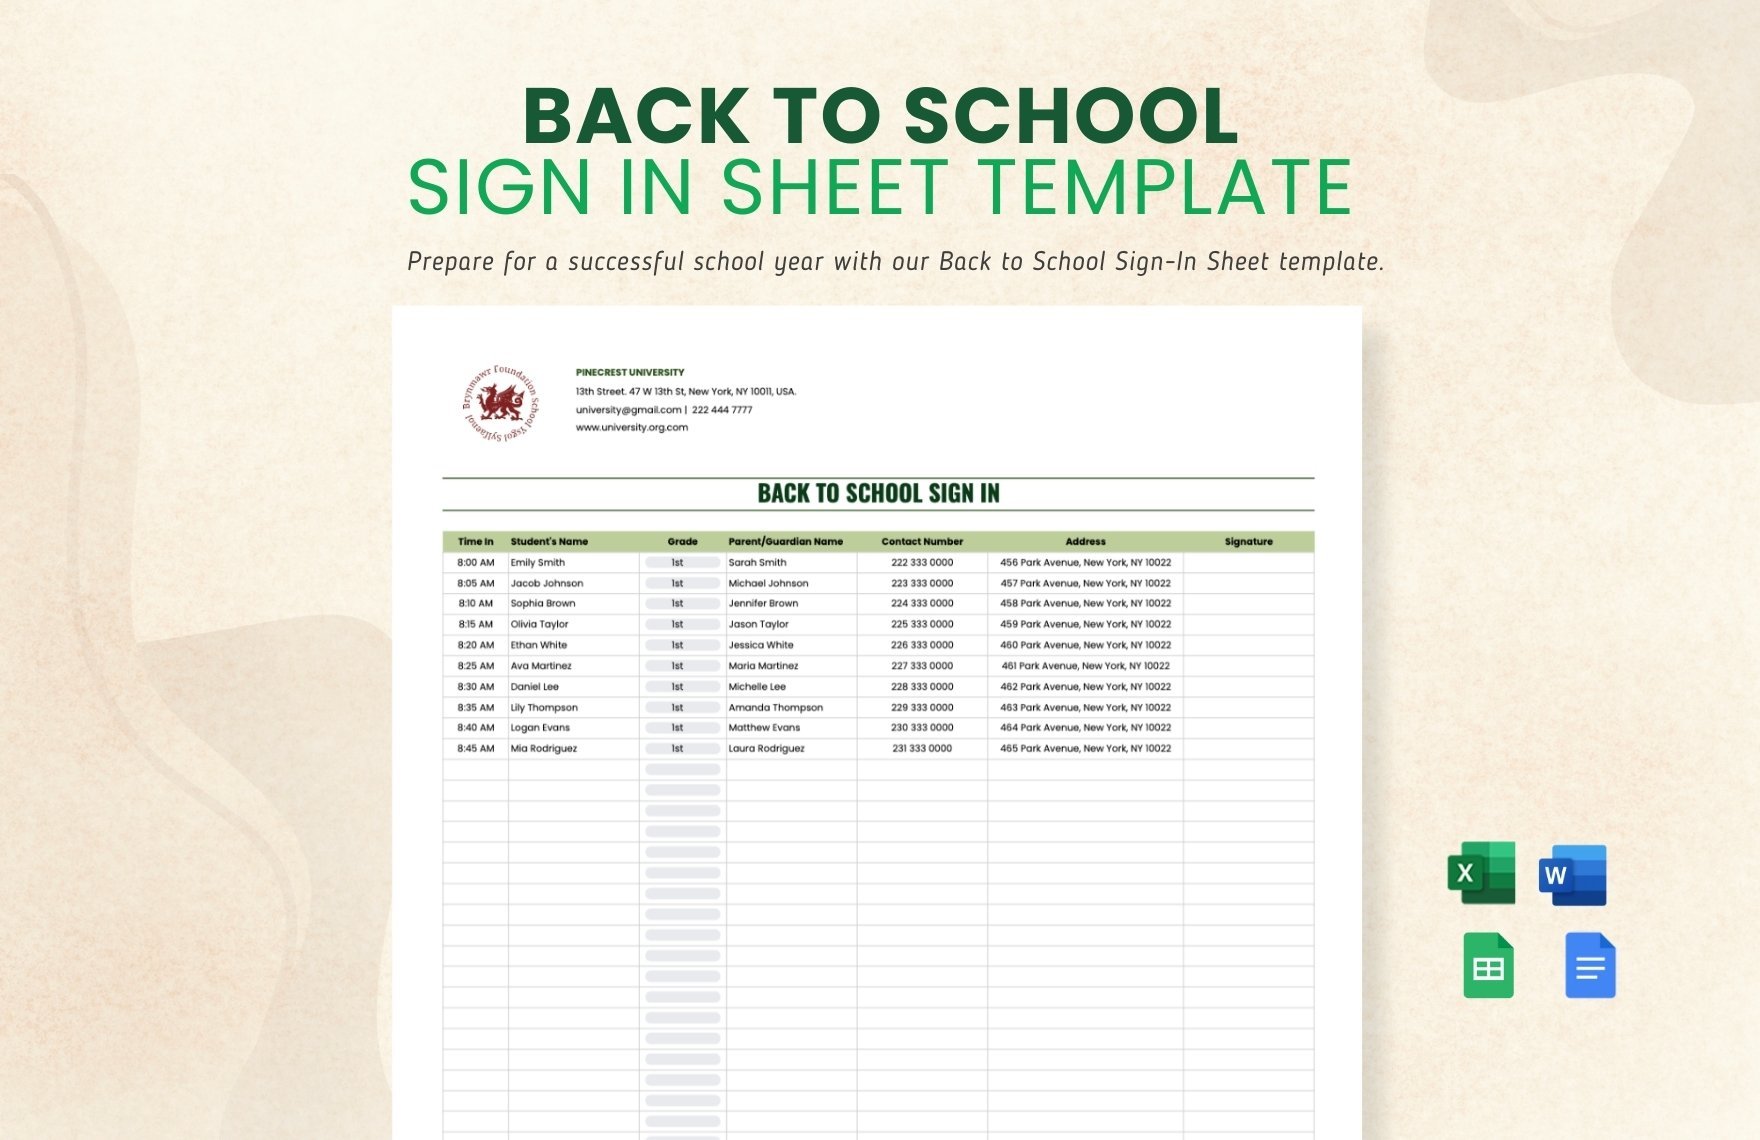 Back To School Sign In Sheet Template in Word, Google Docs, Excel, Google Sheets